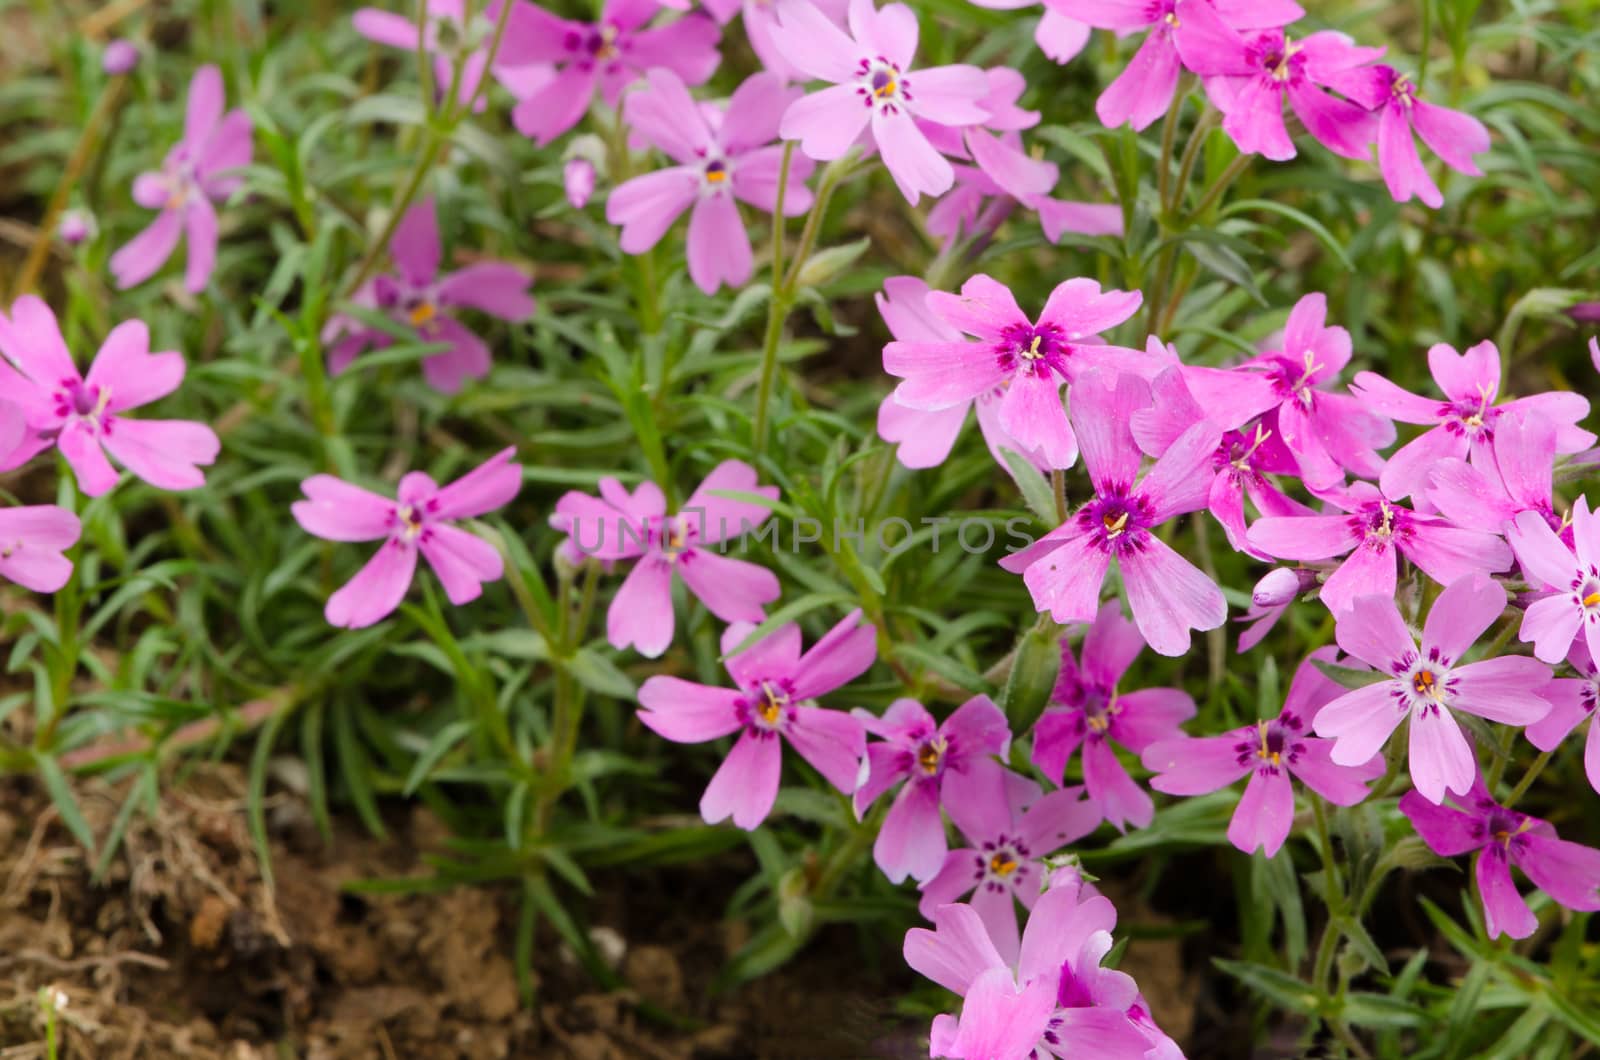 Detail of alpine plant with pink blooms.